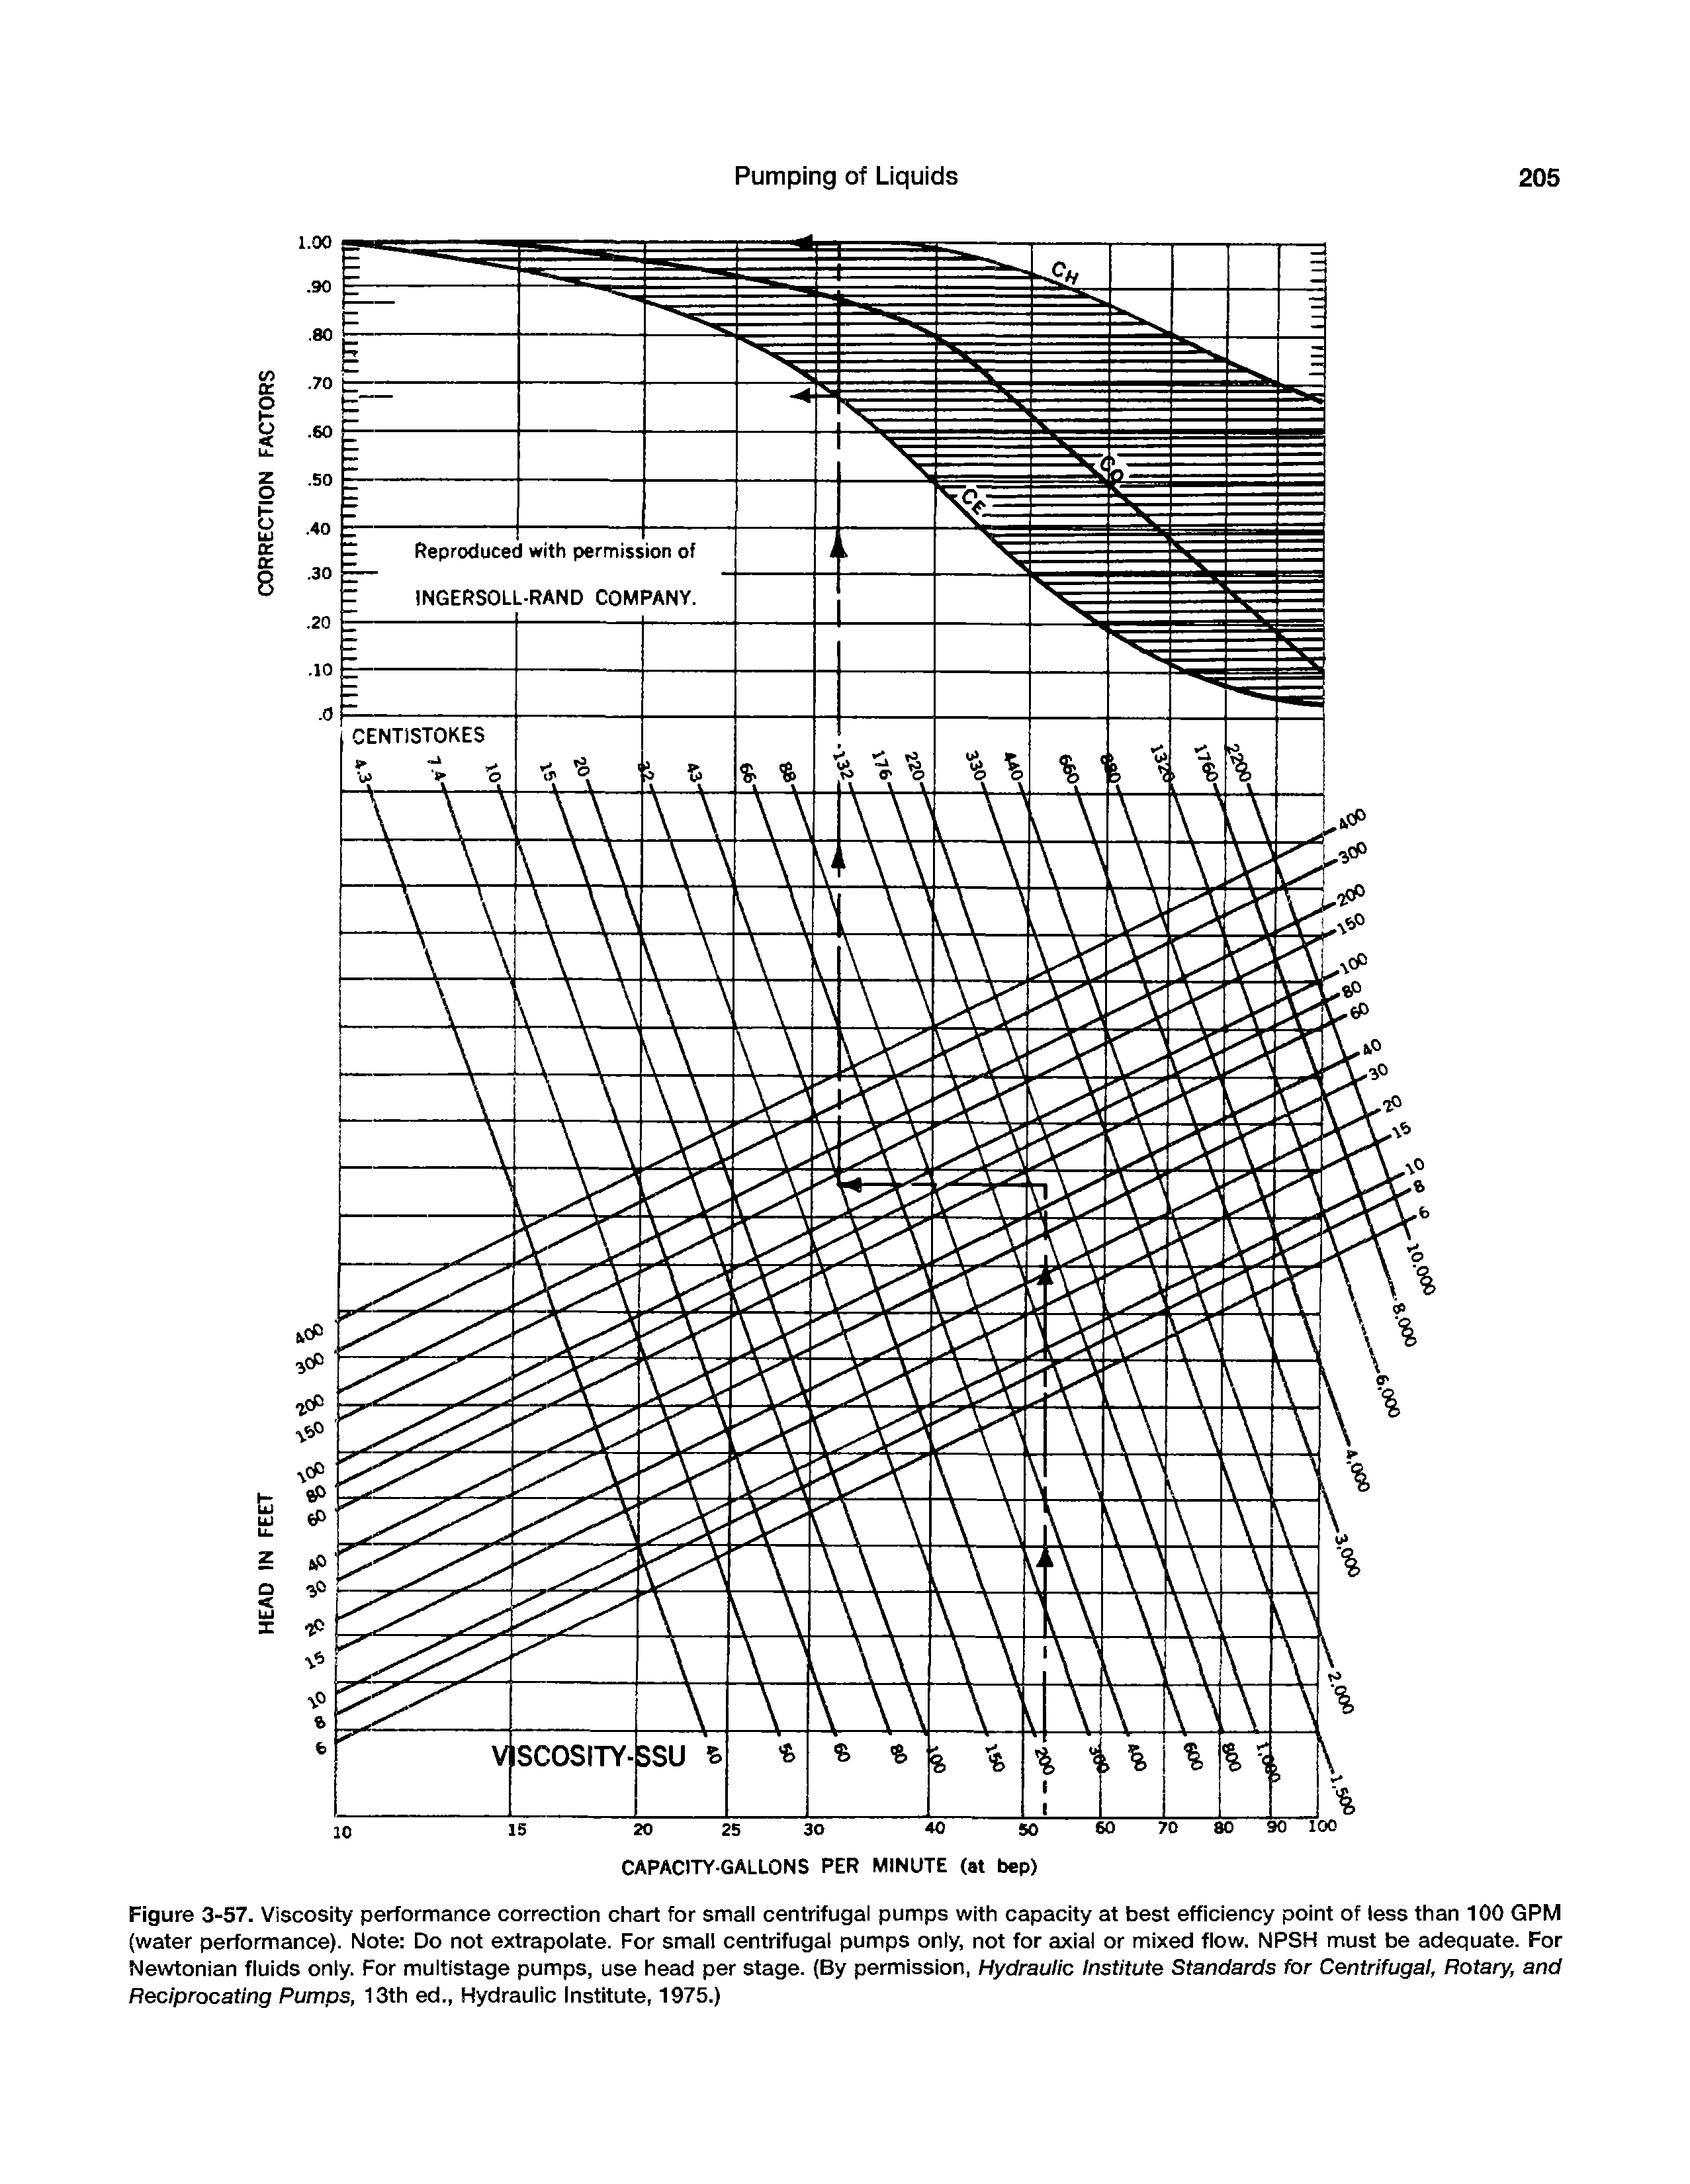 Figure 3-57. Viscosity performance correction chart for small centrifugal pumps with capacity at best efficiency point of less than 100 GPM (water performance). Note Do not extrapolate. For small centrifugal pumps only, not for axial or mixed flow. NPSH must be adequate. For Newtonian fluids only. For multistage pumps, use head per stage. (By permission. Hydraulic Institute Standards for Centrifugal, Rotary, and Reciprocating Pumps, 13th ed.. Hydraulic Institute, 1975.)...